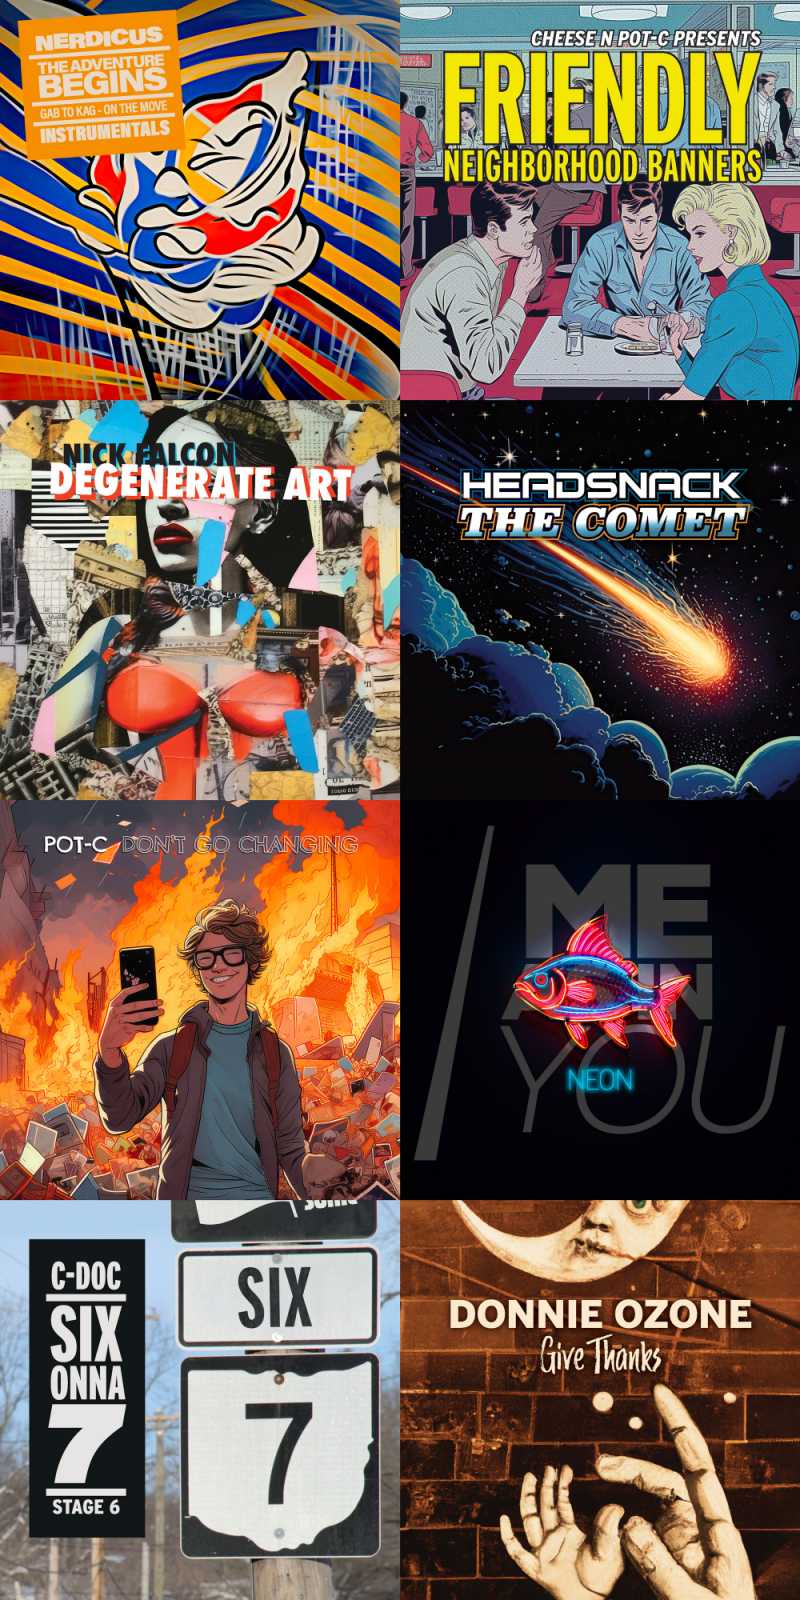 Covers of Netlabel Day releases